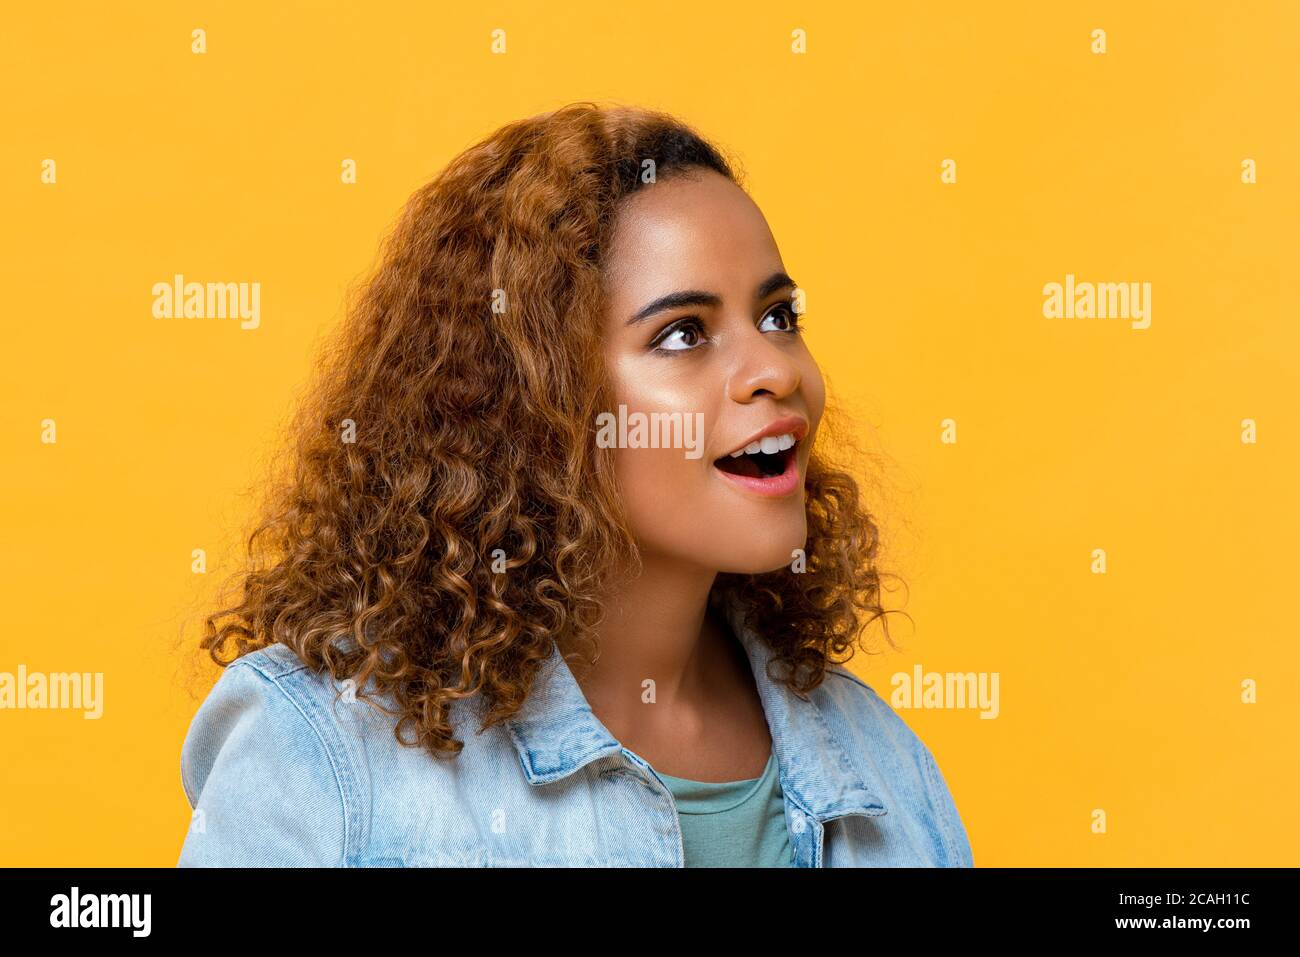 Close up portrait of surprising young beautiful African American woman looking up in isolated studio yellow background Stock Photo